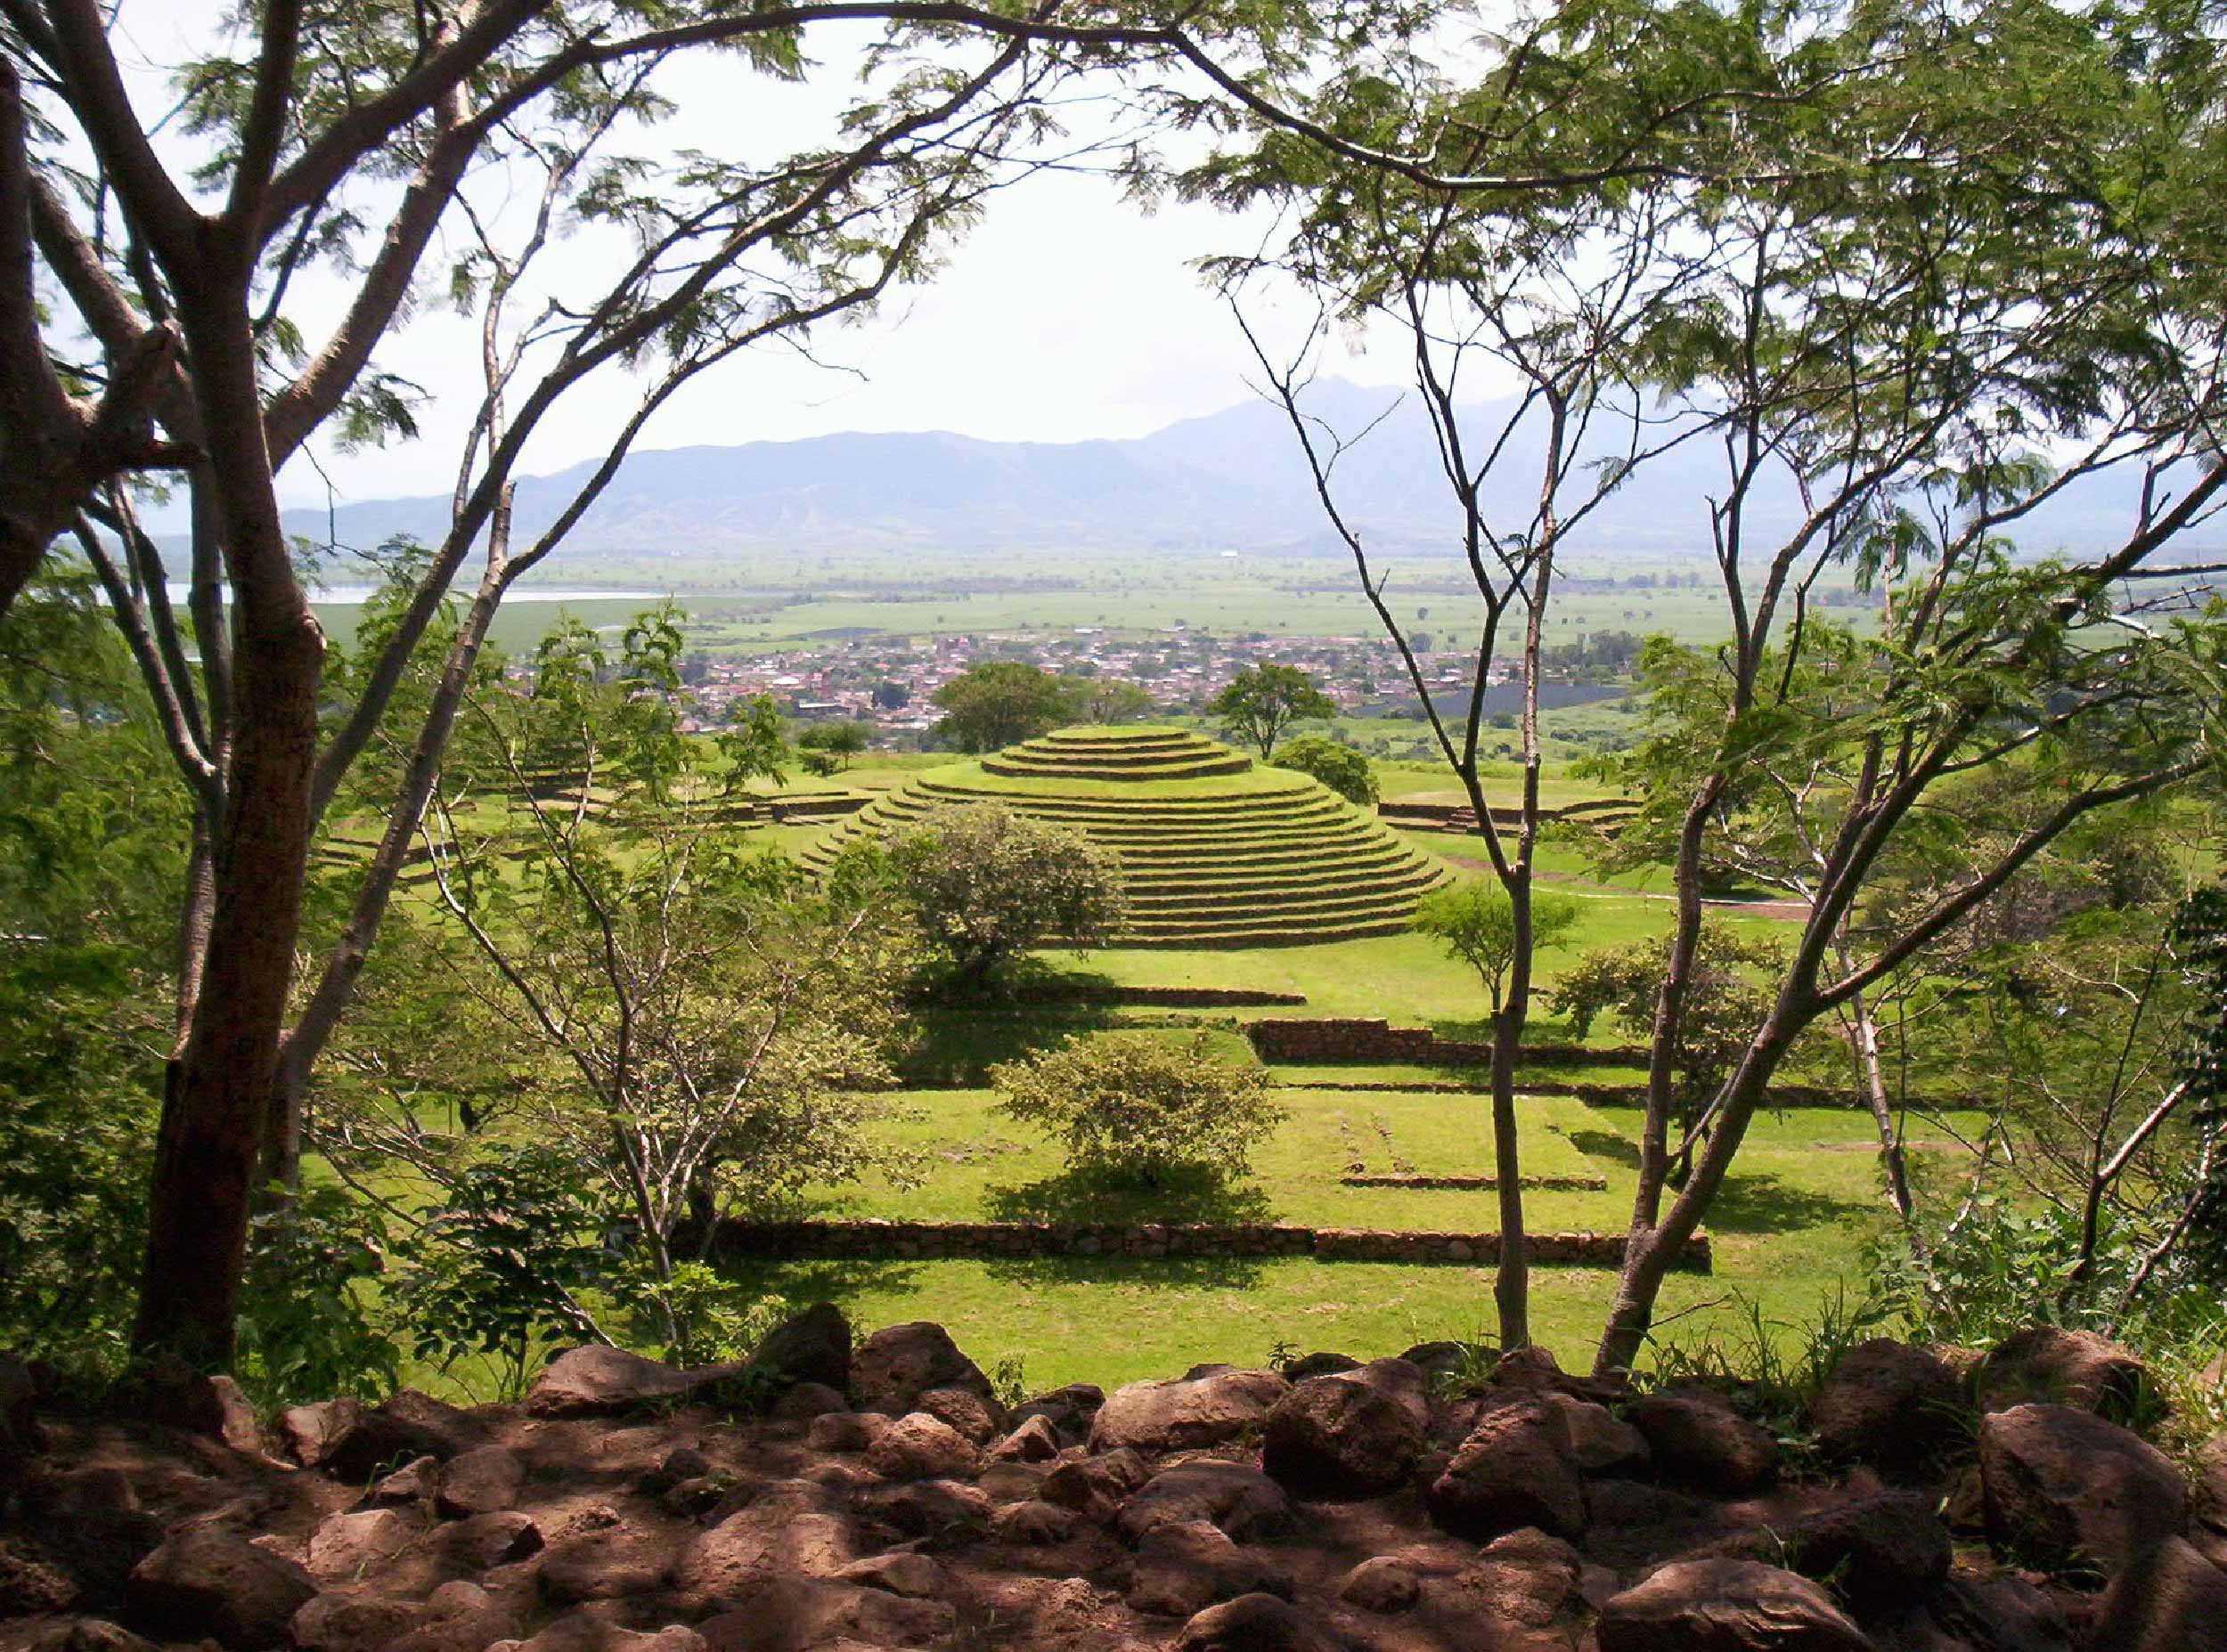 A verdant historical site in Mexico.